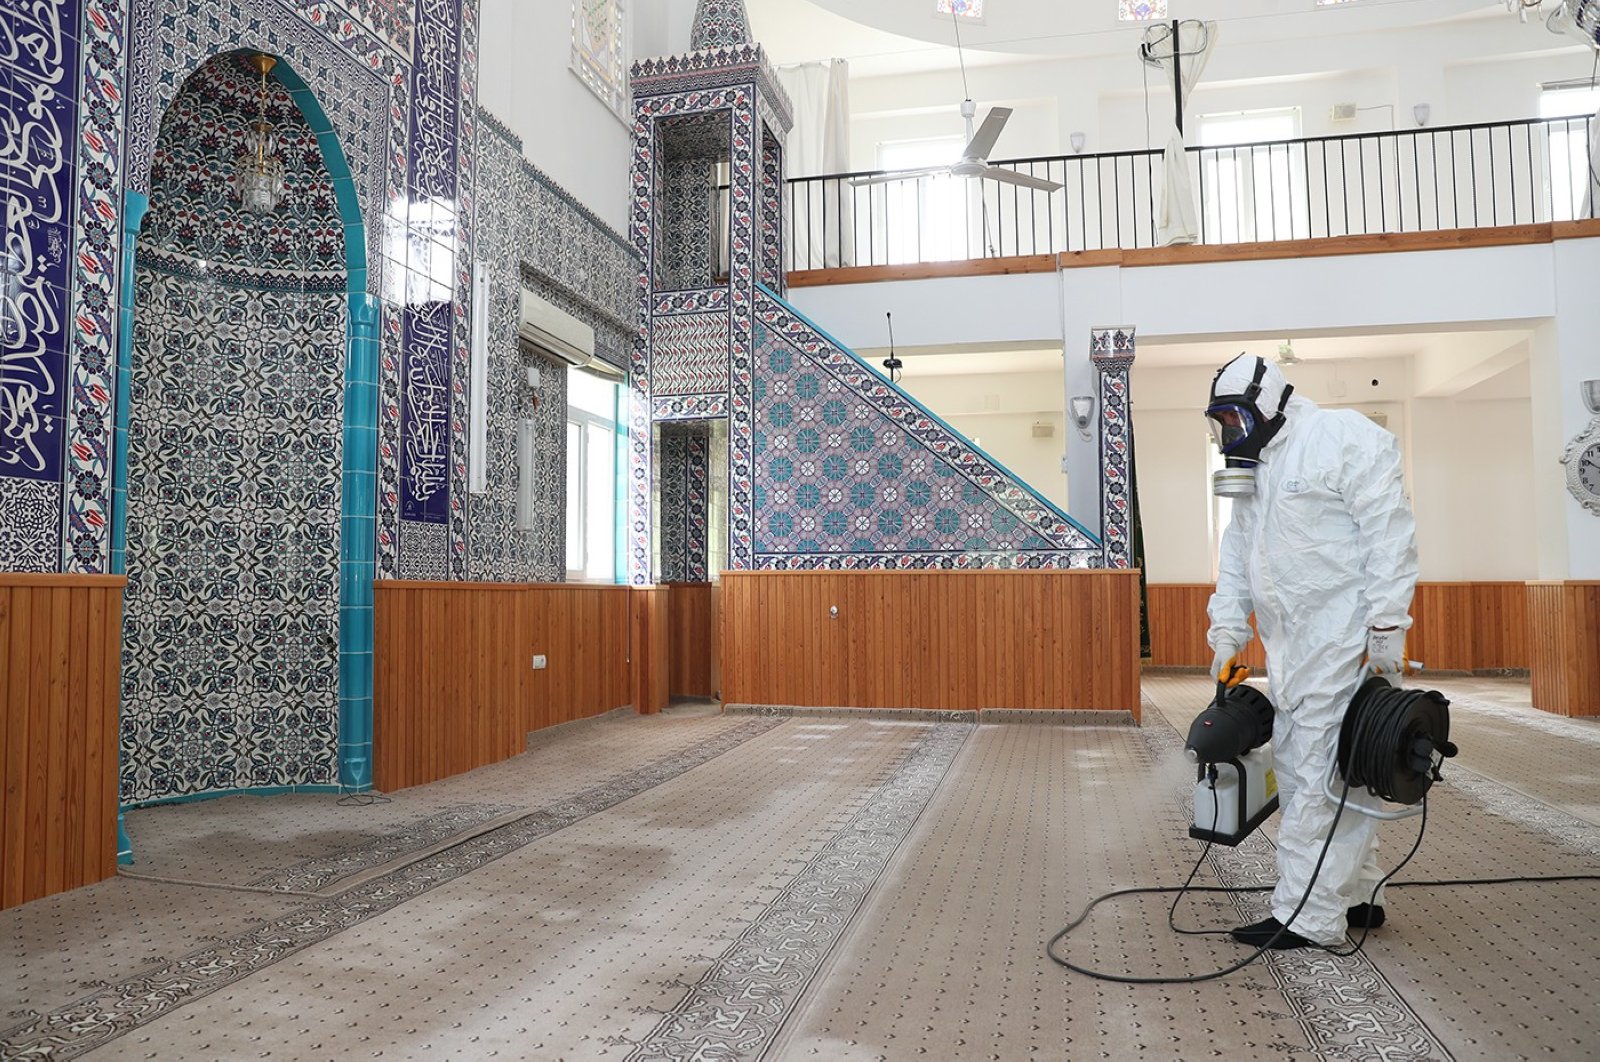 A worker disinfects a mosque in Denizli, Turkey, May 21, 2020. (İHA Photo) 